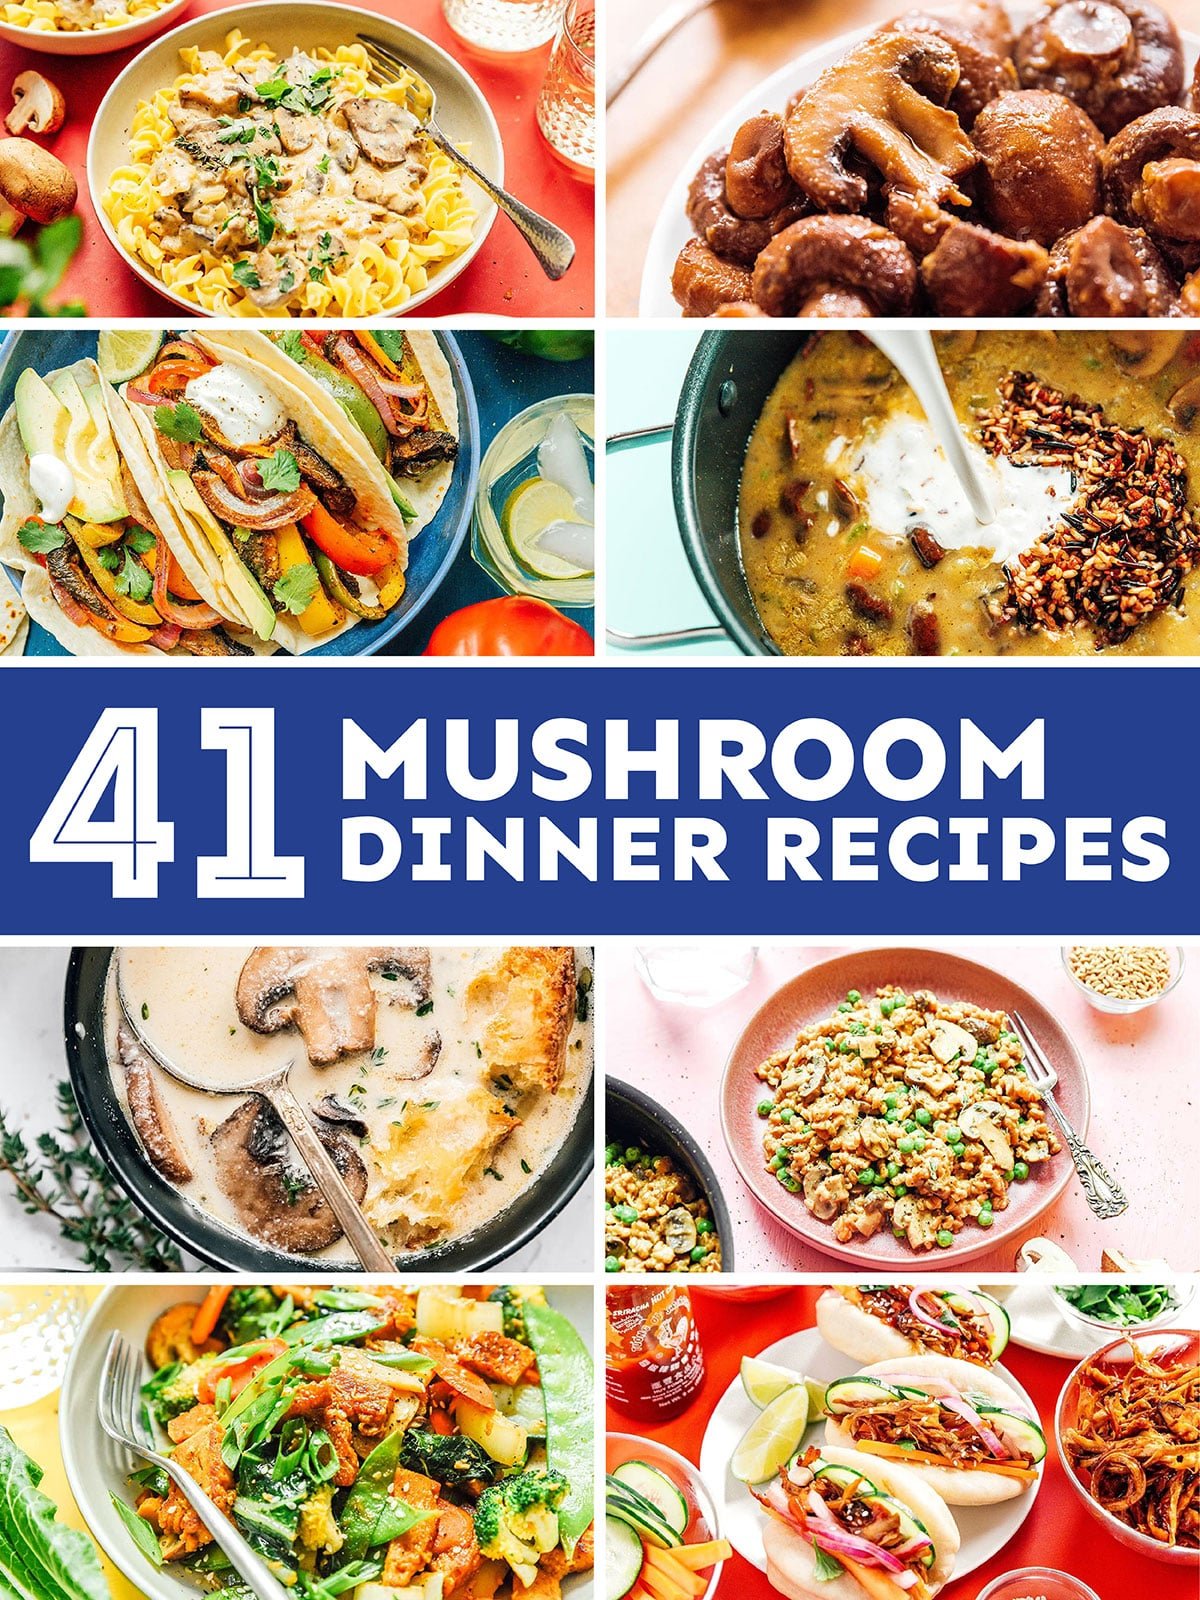 Collage that says "41 mushroom dinner recipes".